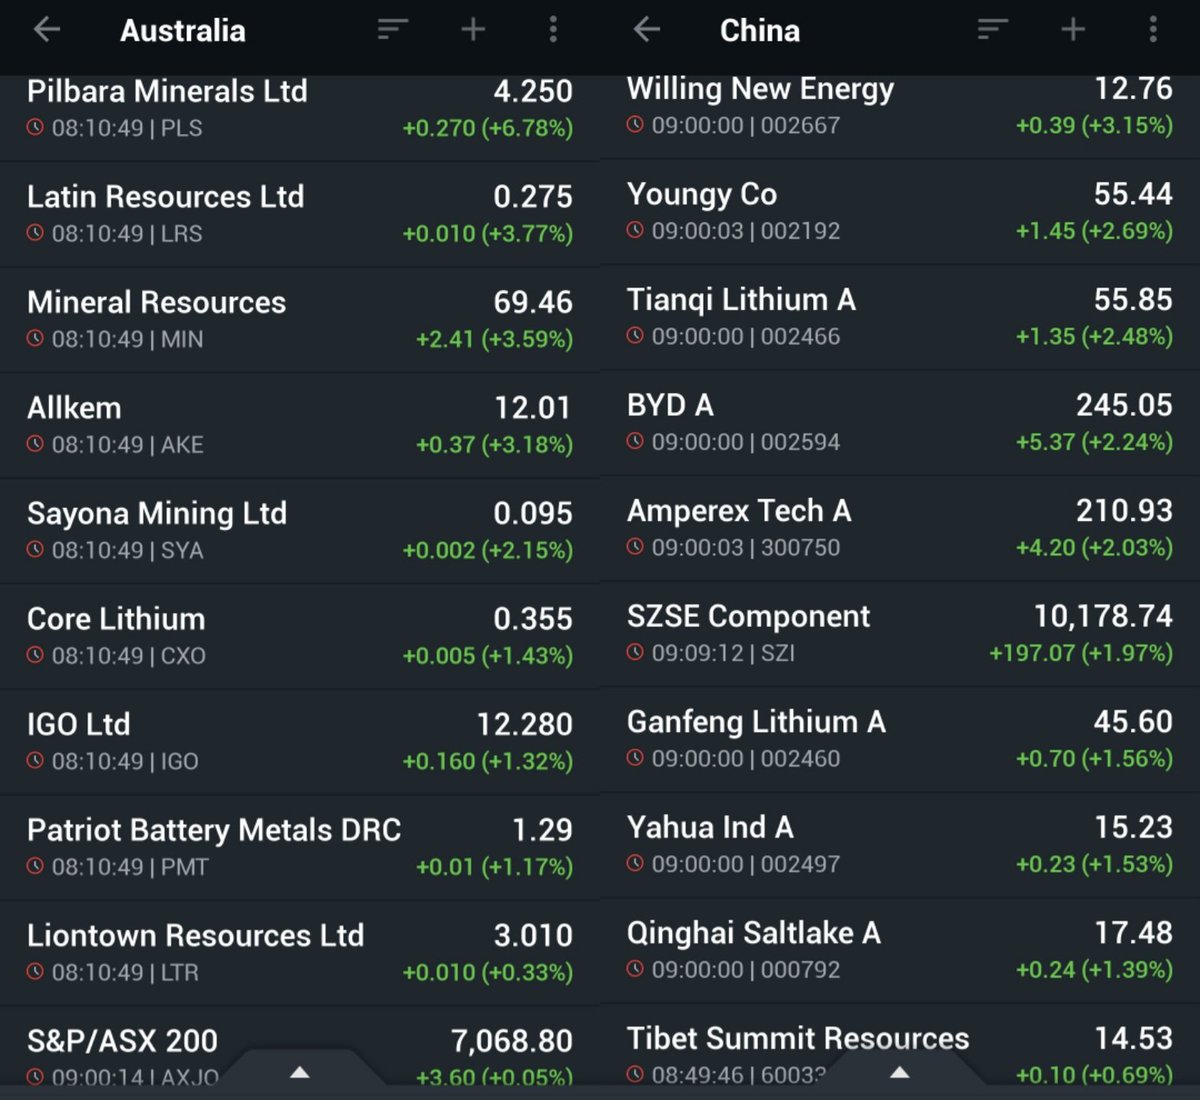 Sentiment pivot on Chinese stock market protected ASX #lithiumstocks from Wall Street negative spillover, while some Chinese lithium futures were up today. Oversold lithium stocks benefiting from China's recovery appeared in the spotlight of investors.
#asxstocks #chinesestocks